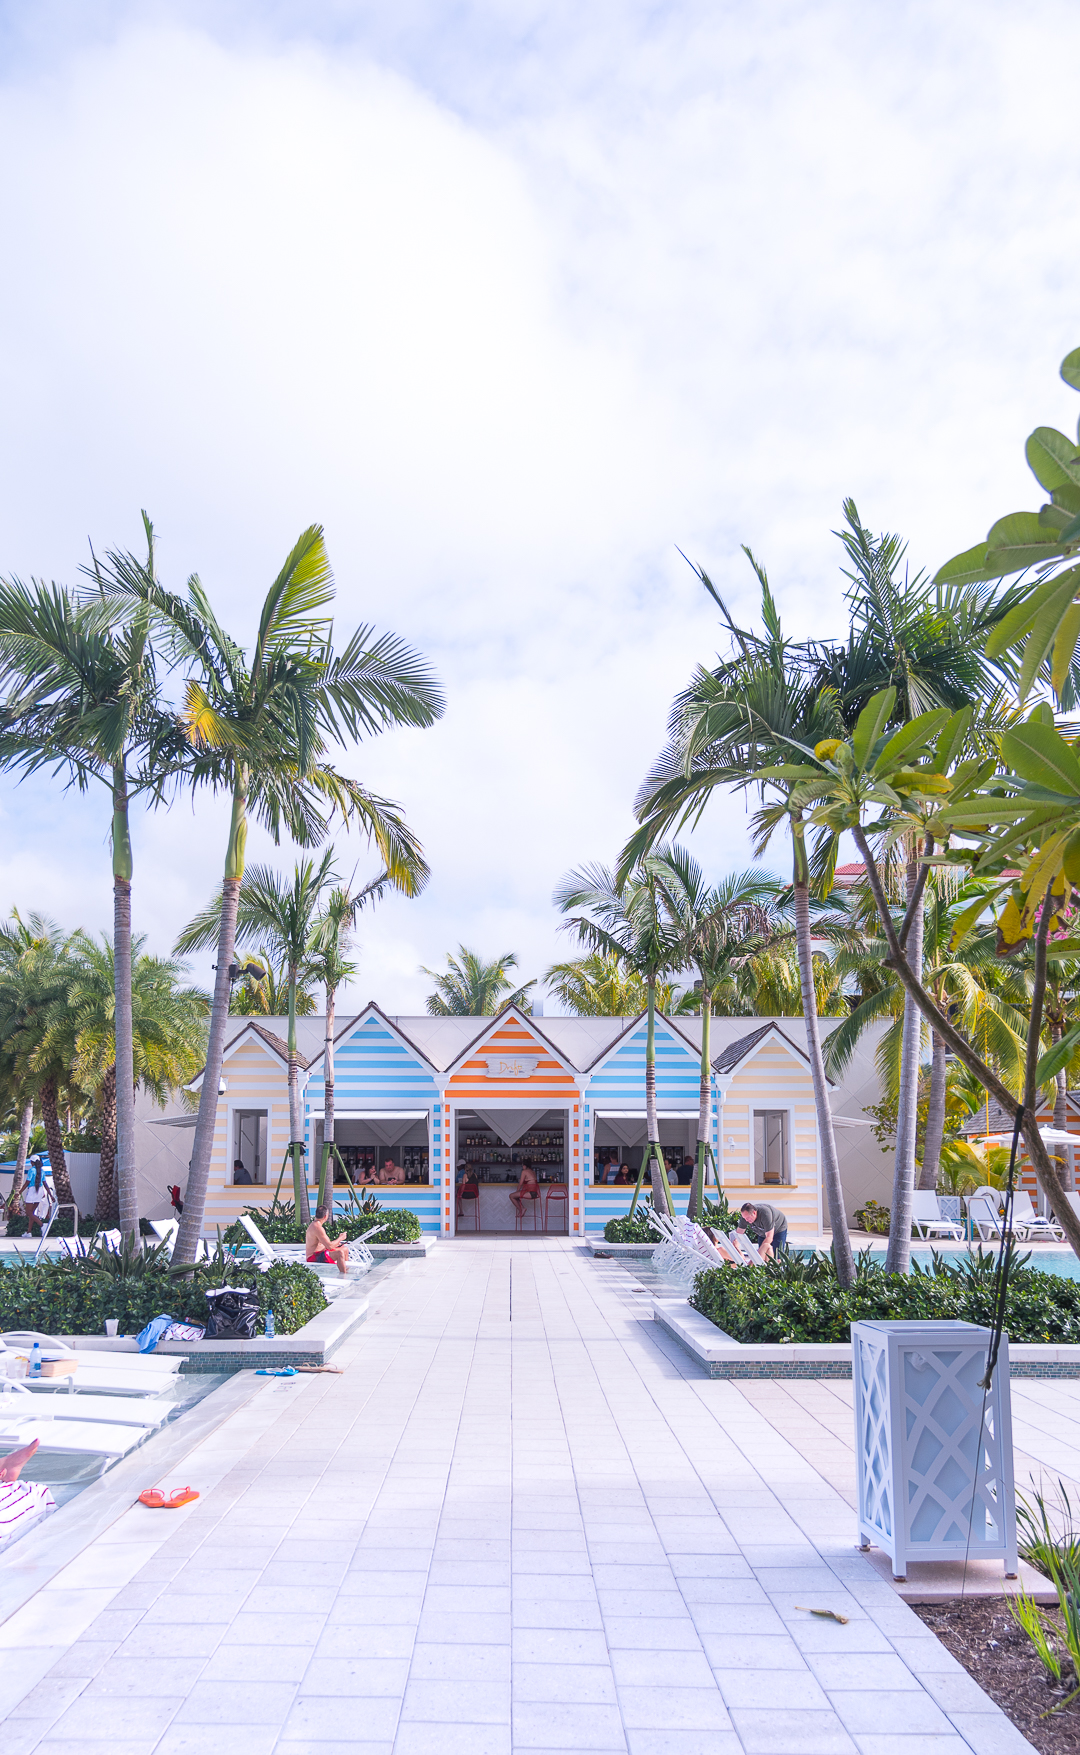 best place to stay in the bahamas - baha mar resort review in the bahamas by popular Chicago travel blogger Visions of Vogue